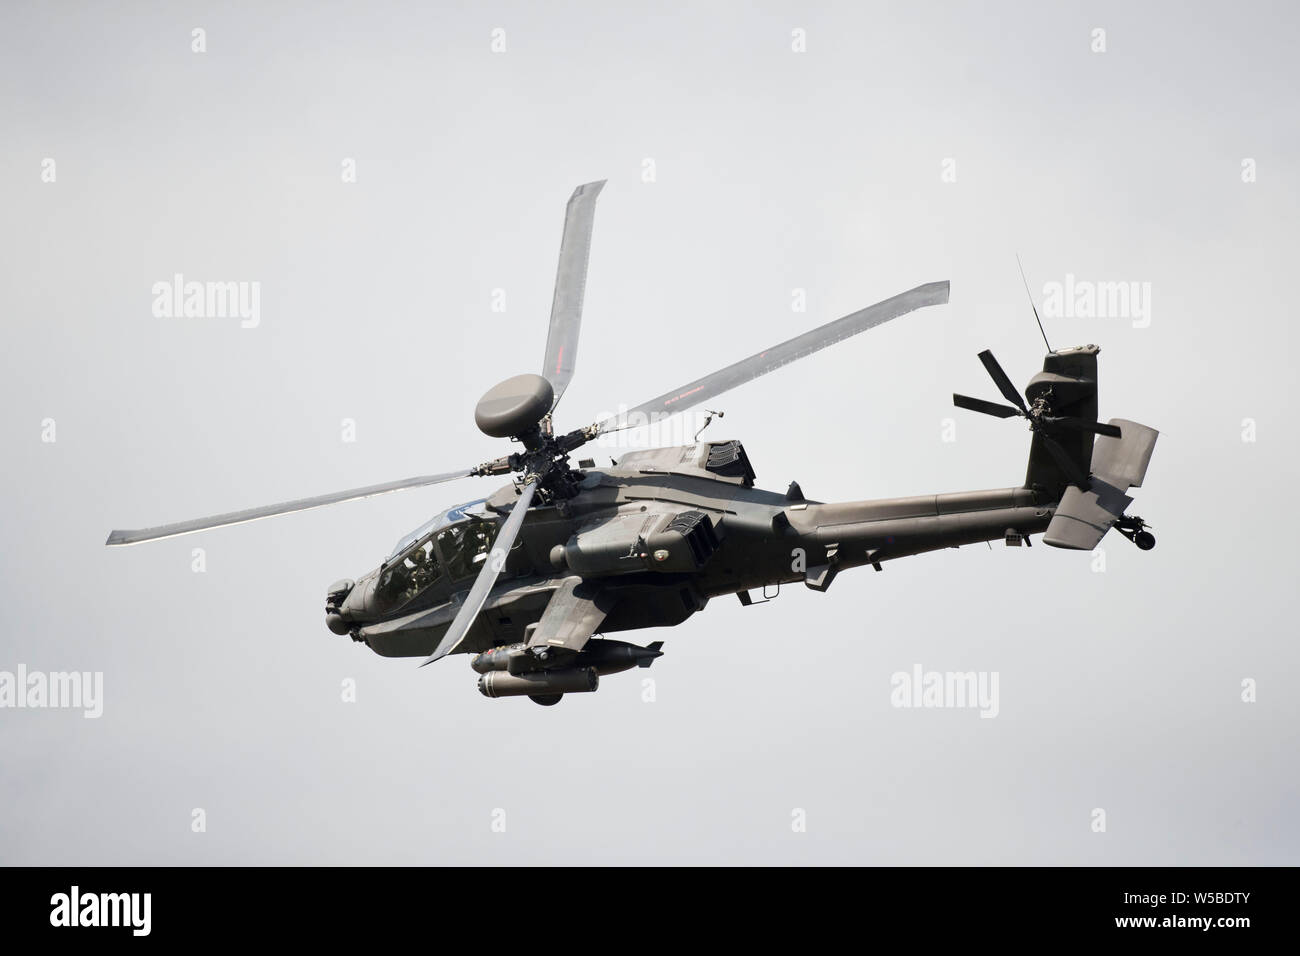 Augusta Westland Apache AH helicopter giving a fantastic display at the 2019 RIAT air show, Fairford, Gloucestershire,uk Stock Photo